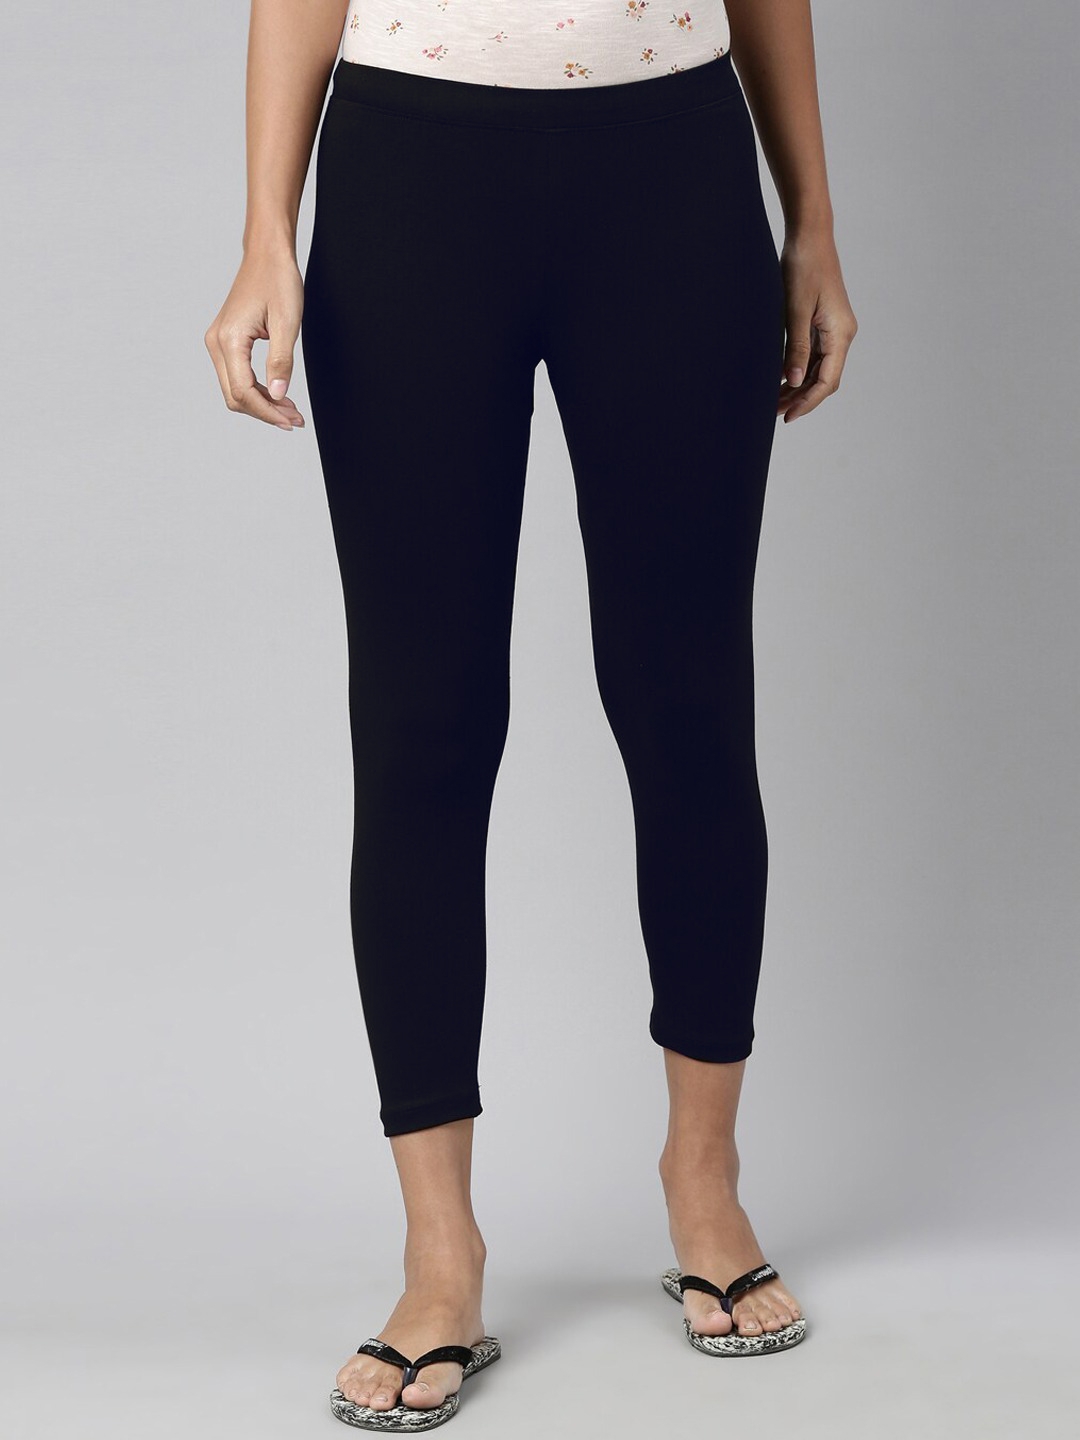 Kryptic | Kryptic womens cotton stretch solid mid ankle length legging